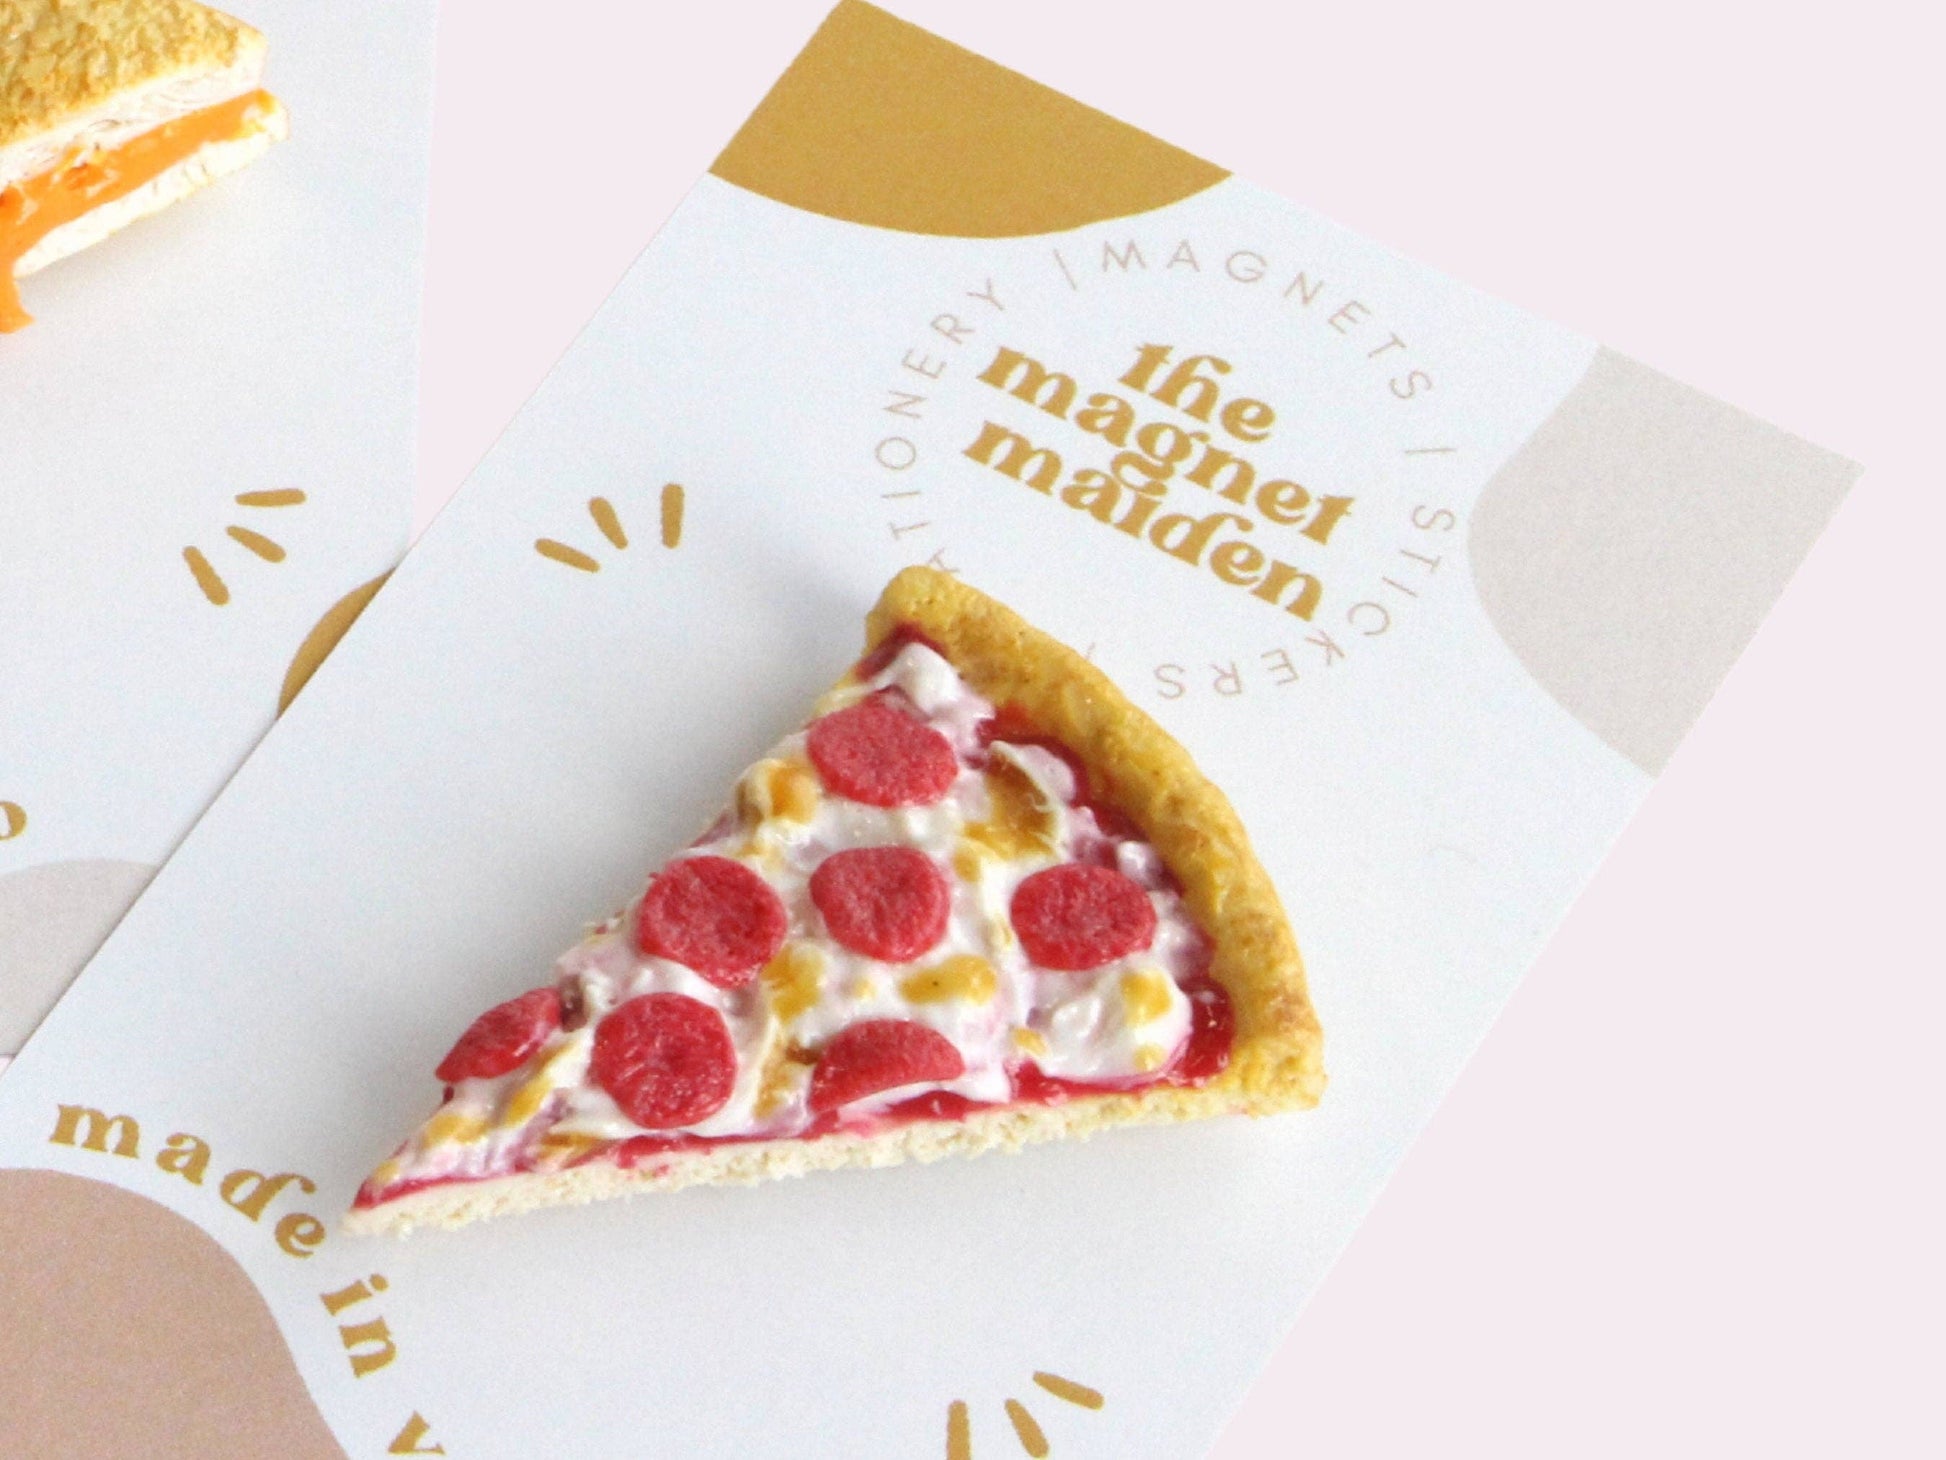 Handmade magnet shaped like a single slice of pepperoni pizza. Shown with printed backing label.